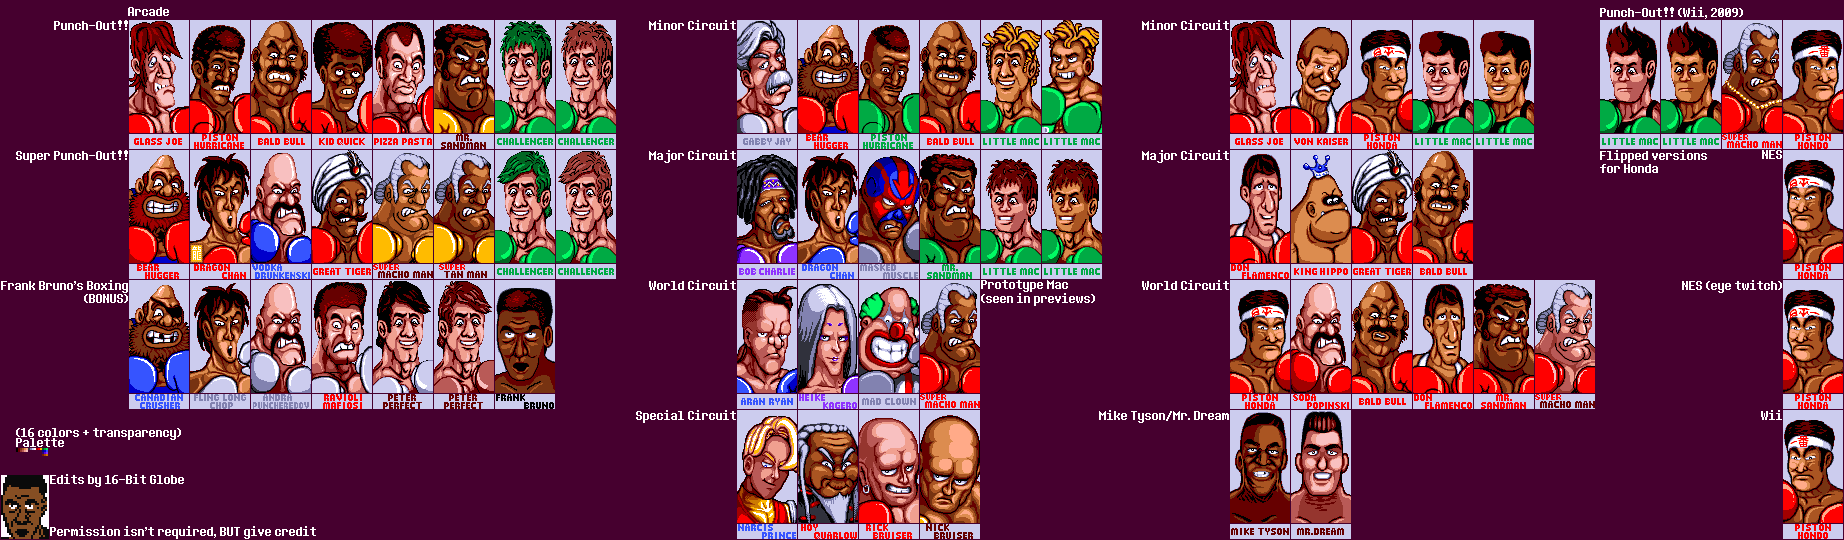 Portraits (Expanded, Arcade-Style)